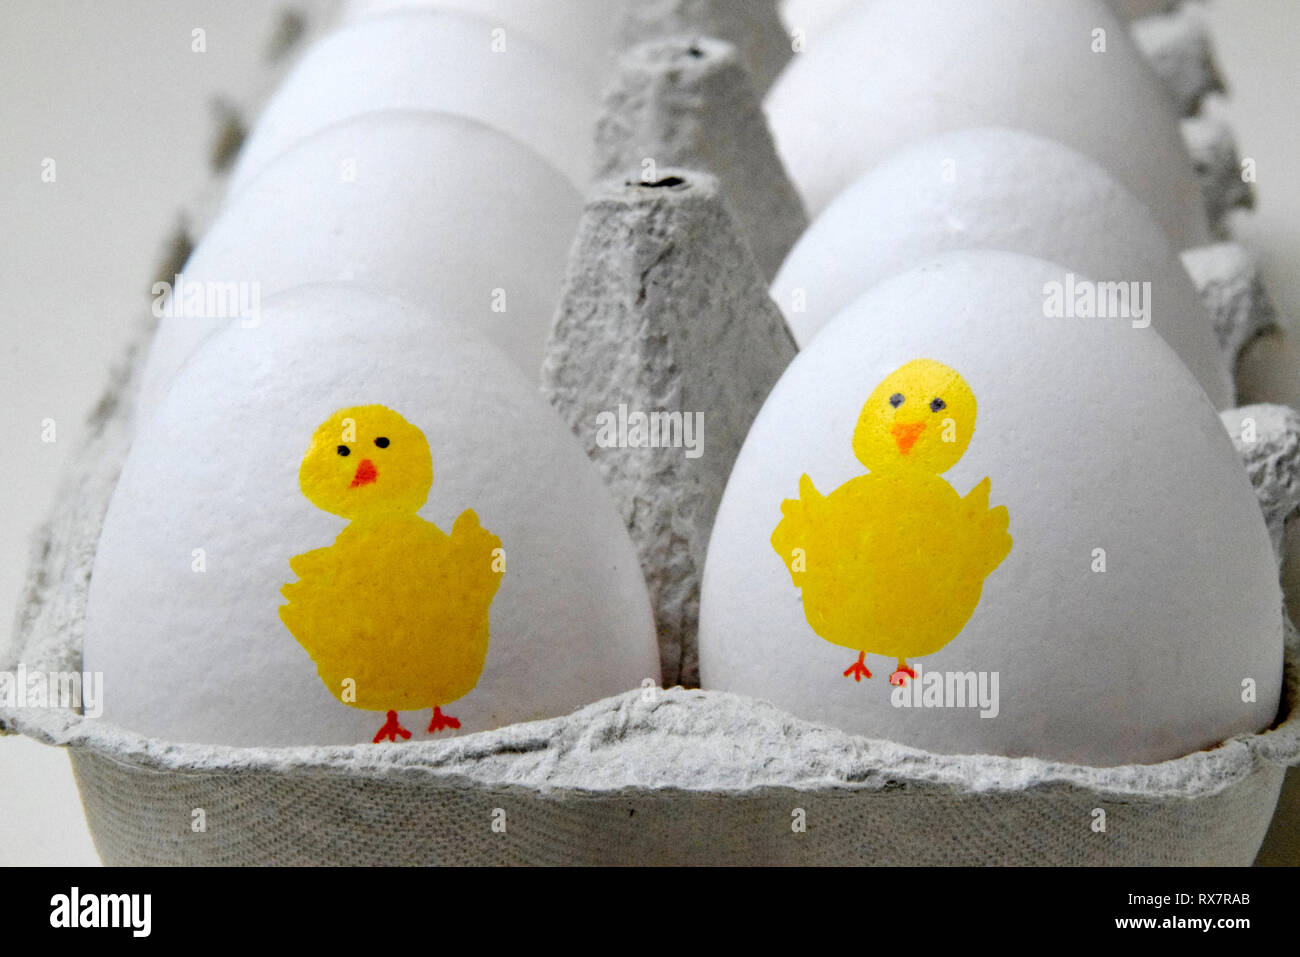 Yellow Easter chicken painted on white eggs at the front of a box of eggs Stock Photo